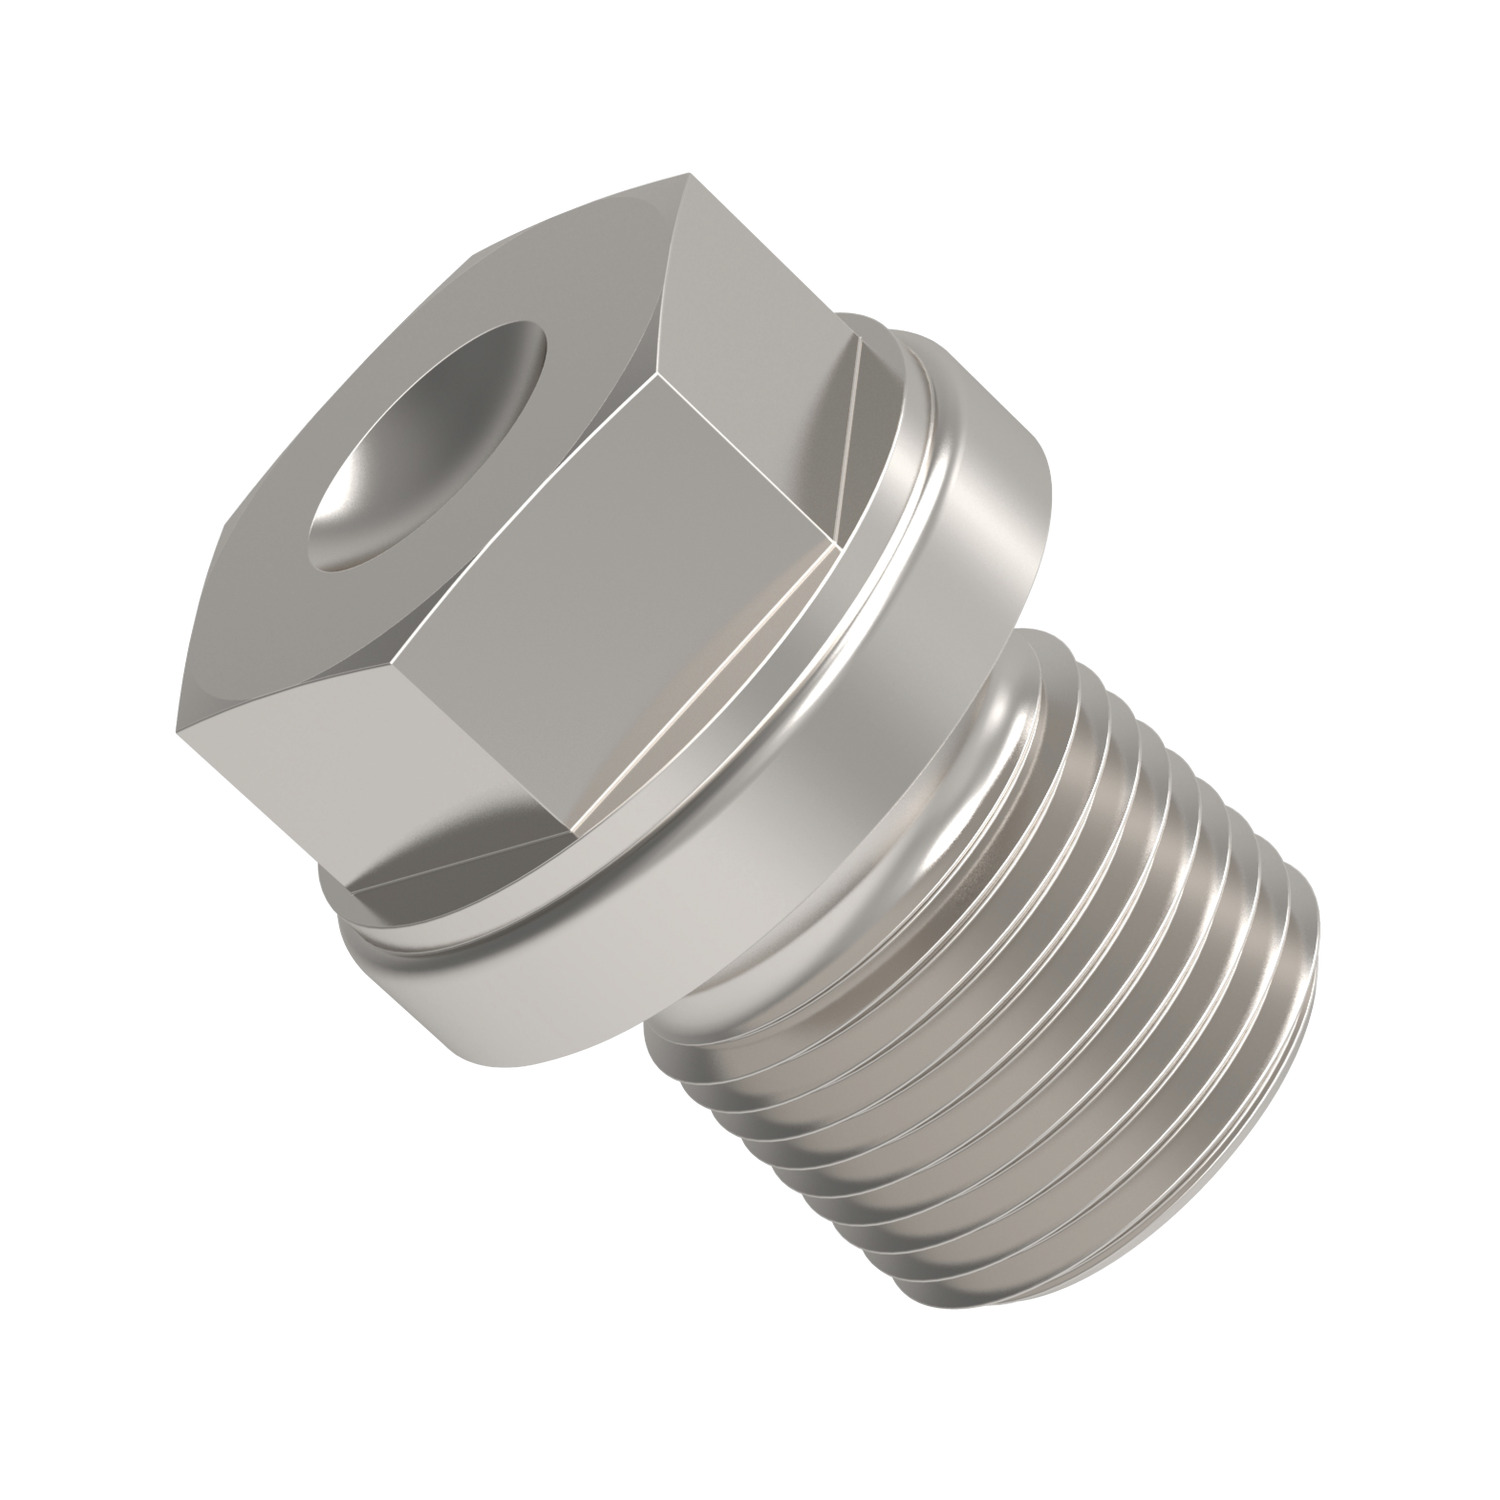 Blanking Plugs Heavy Duty Blaking nuts are manufactured to DIN 910.